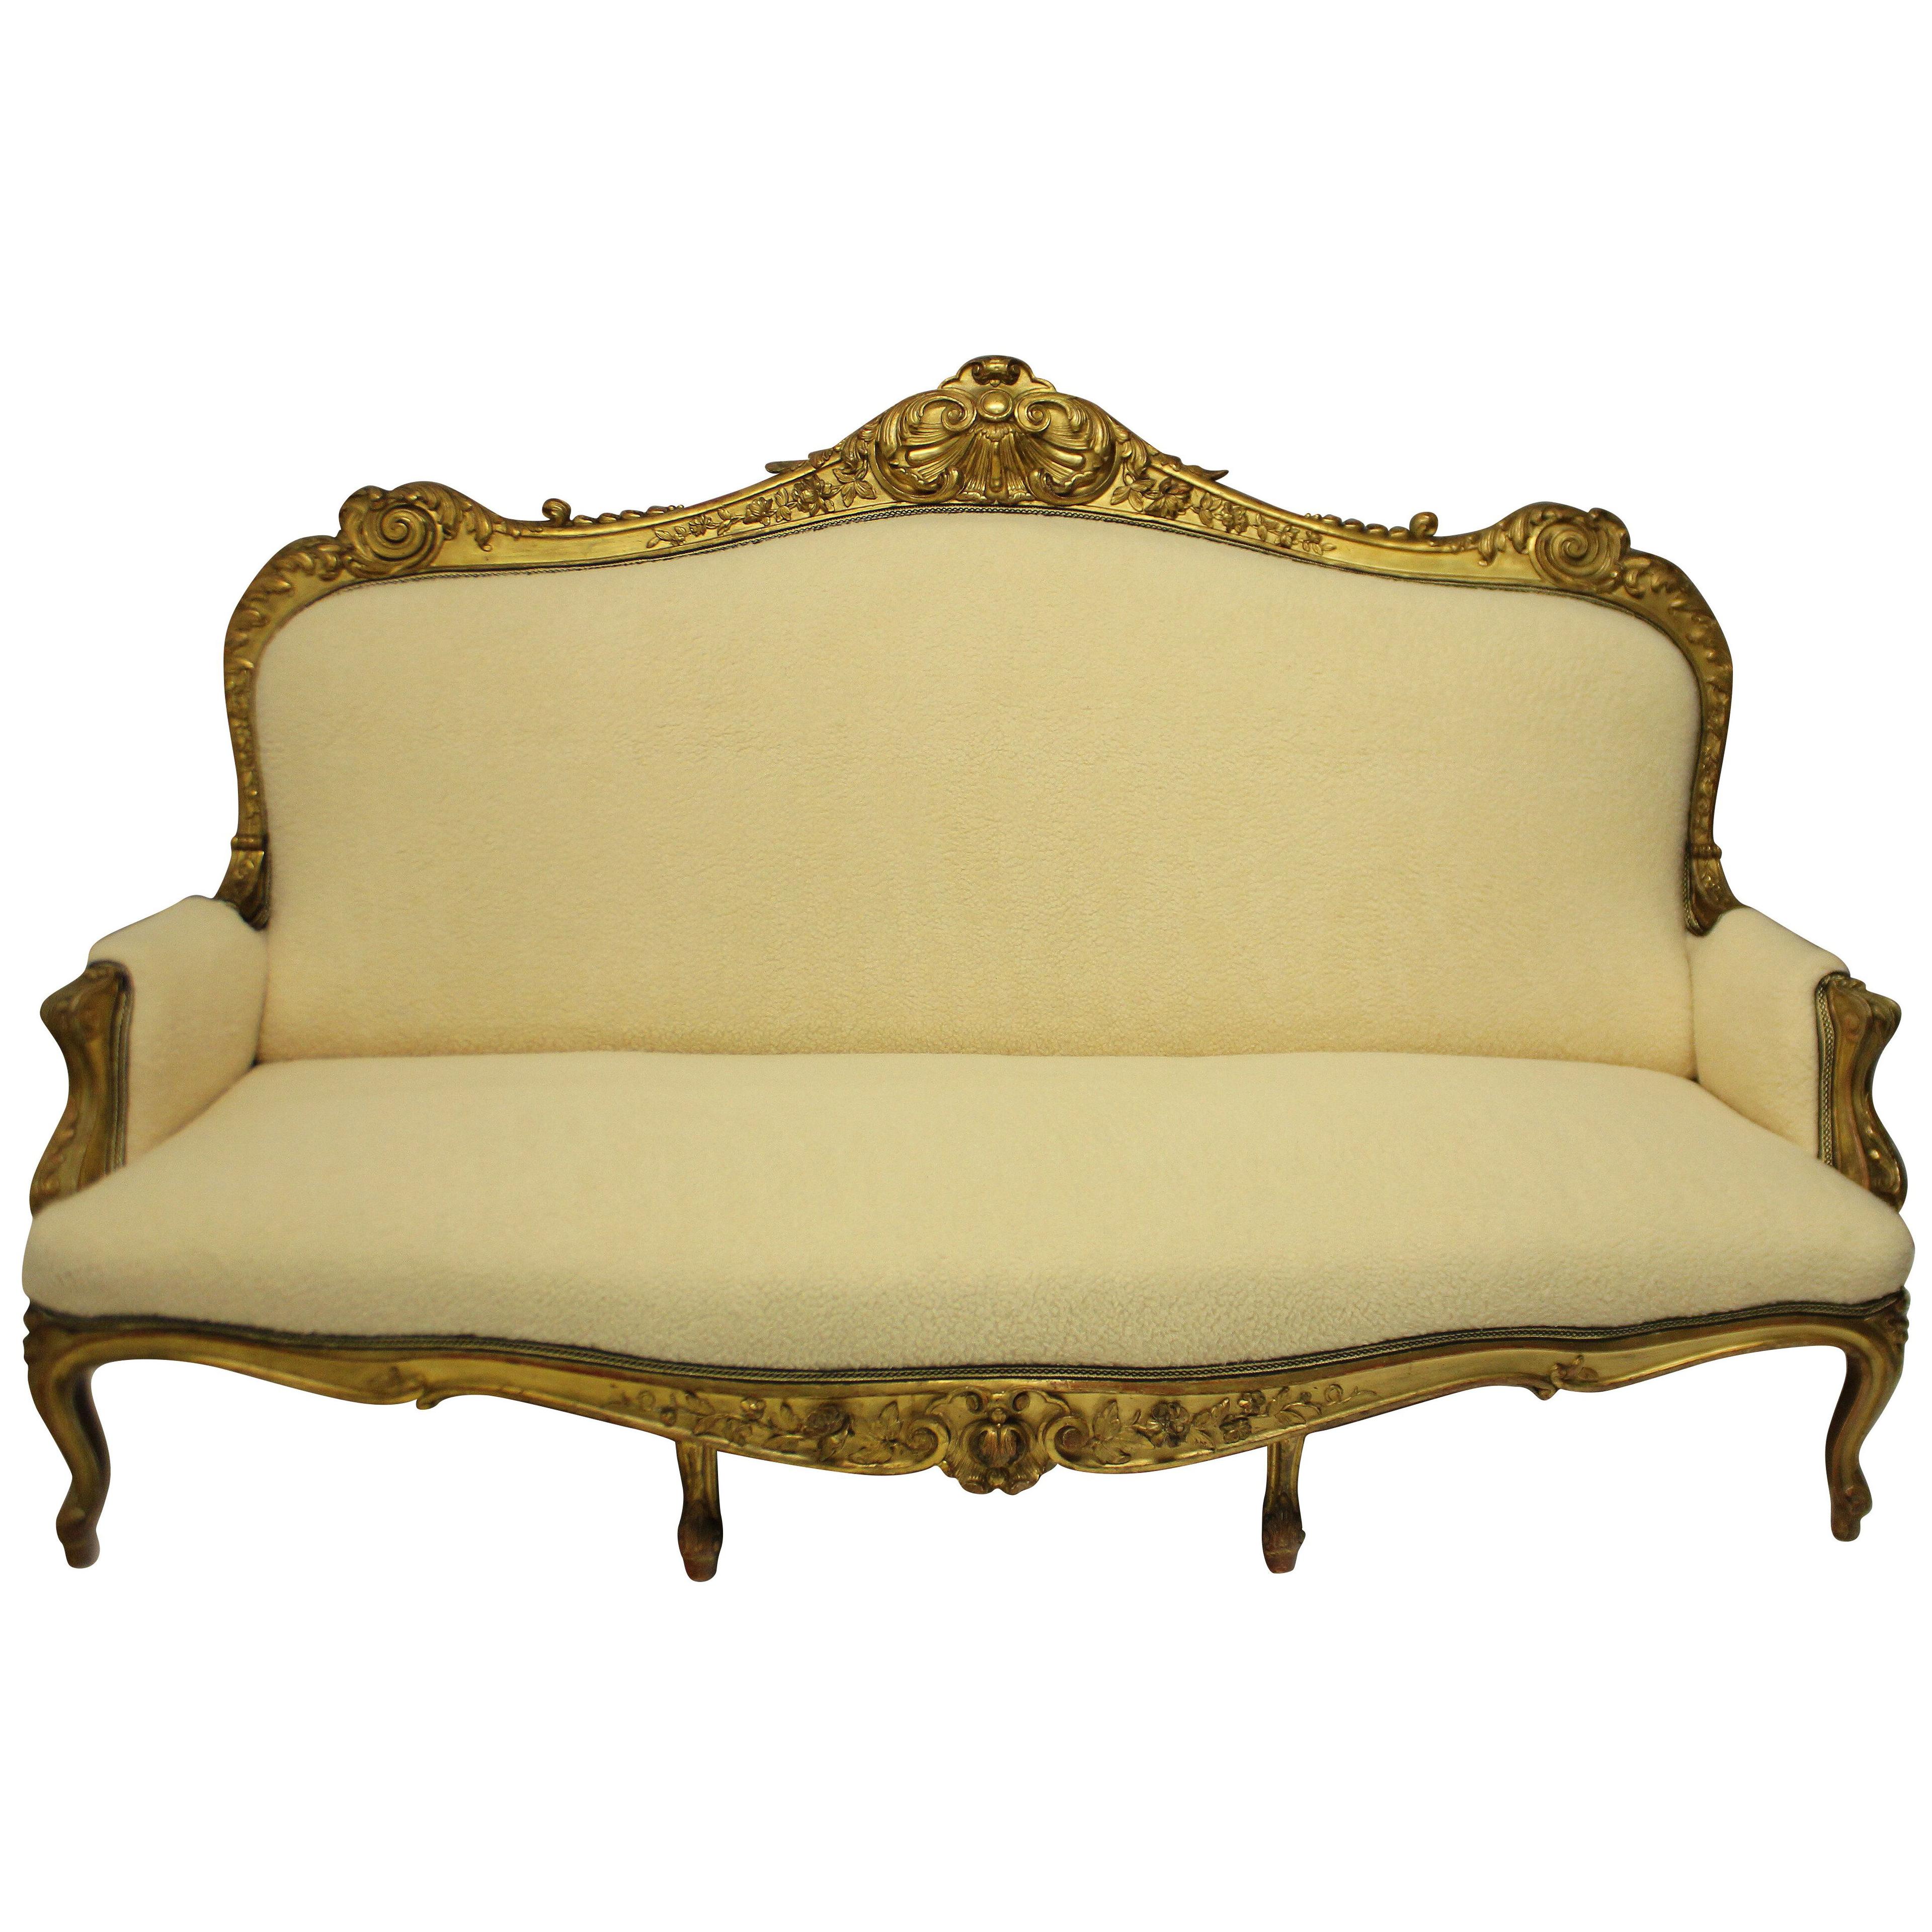 A LARGE ENGLISH EARLY XIX CENTURY GILTWOOD SETTEE